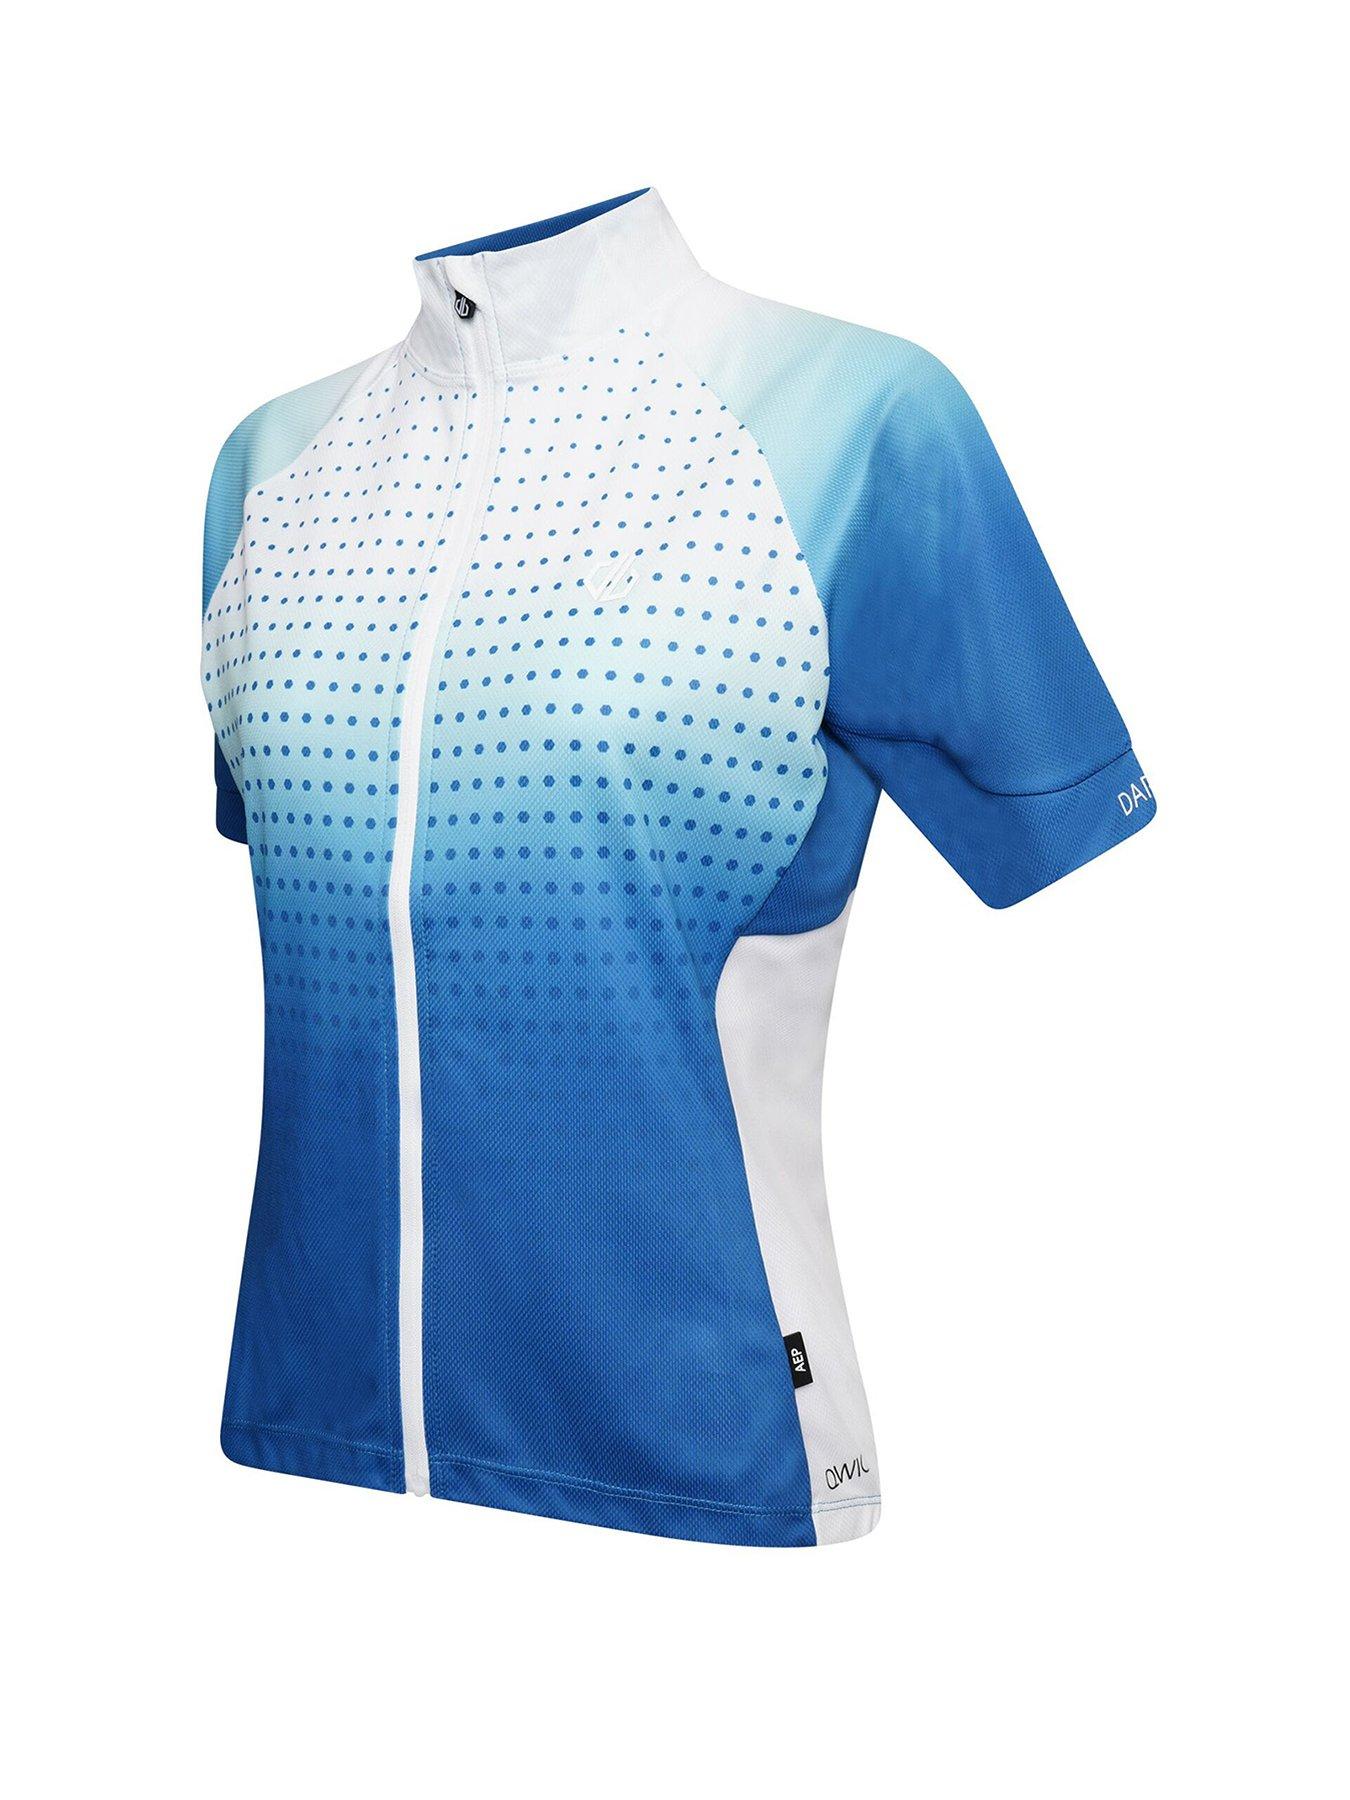 Details about   Women Cycling Jersey Bicycle Sportswear Top Clothing Short sleeves Baby pink 